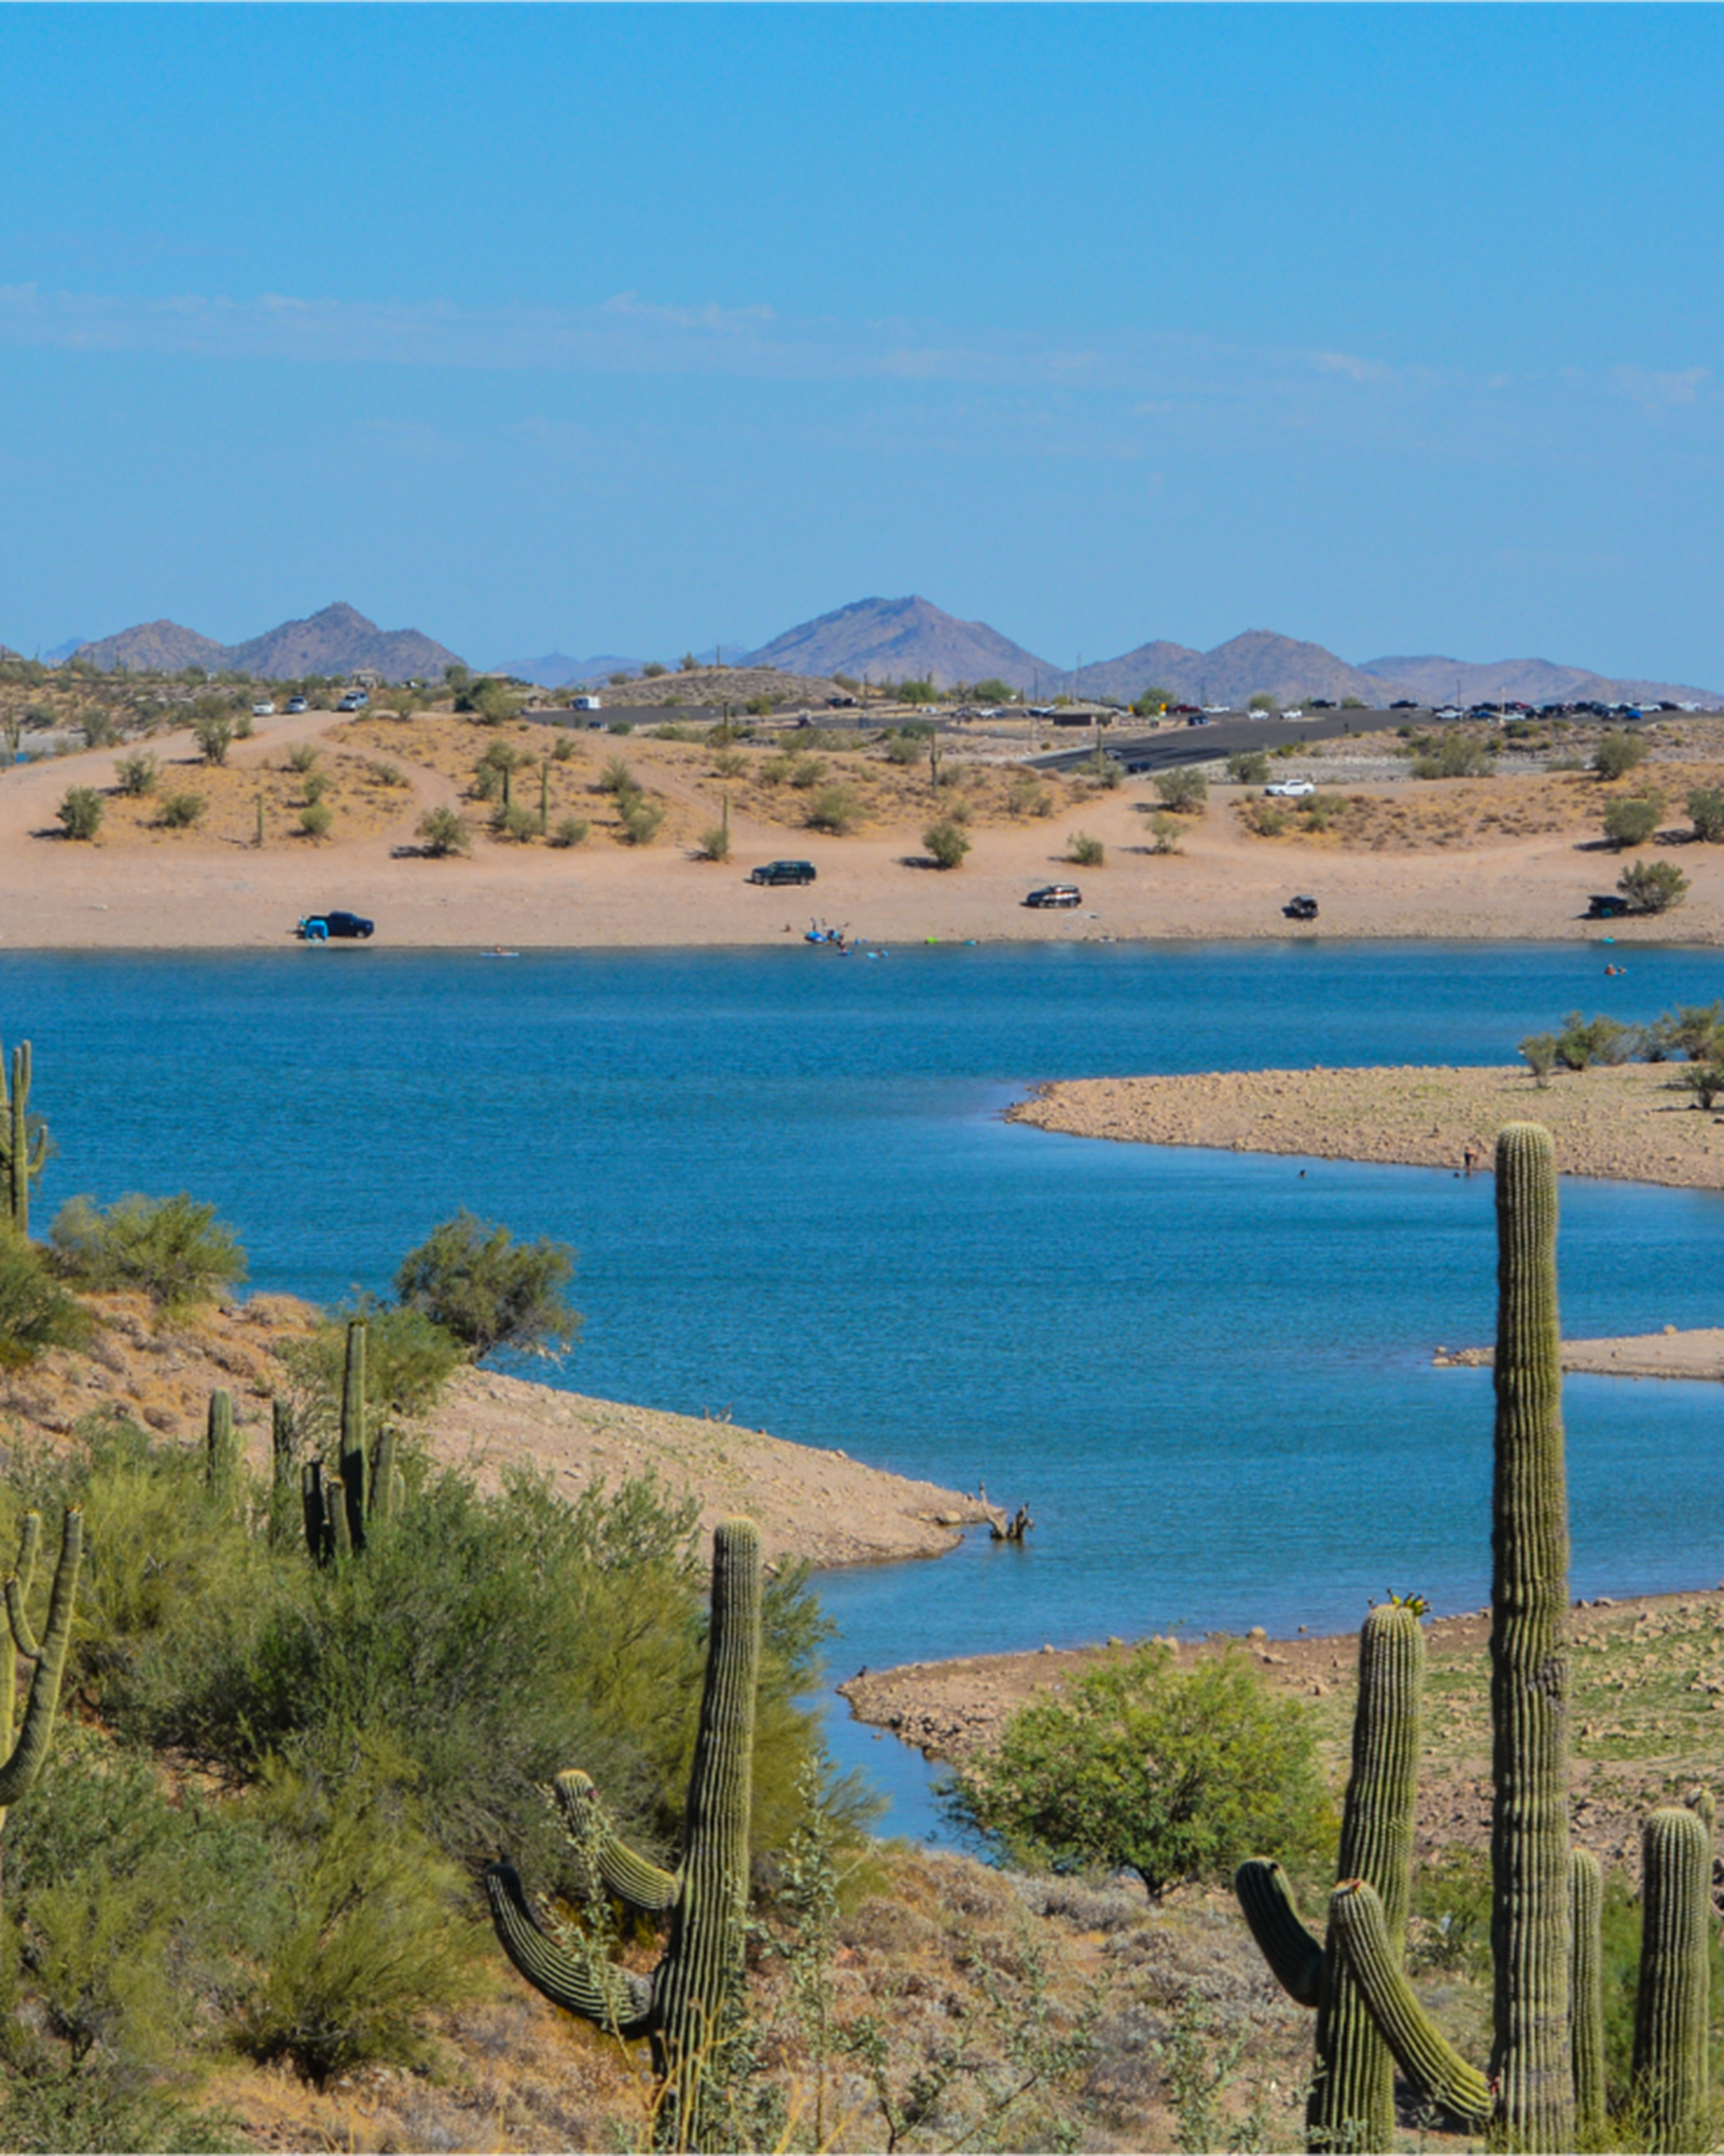 Lake surrounded by desert scenery